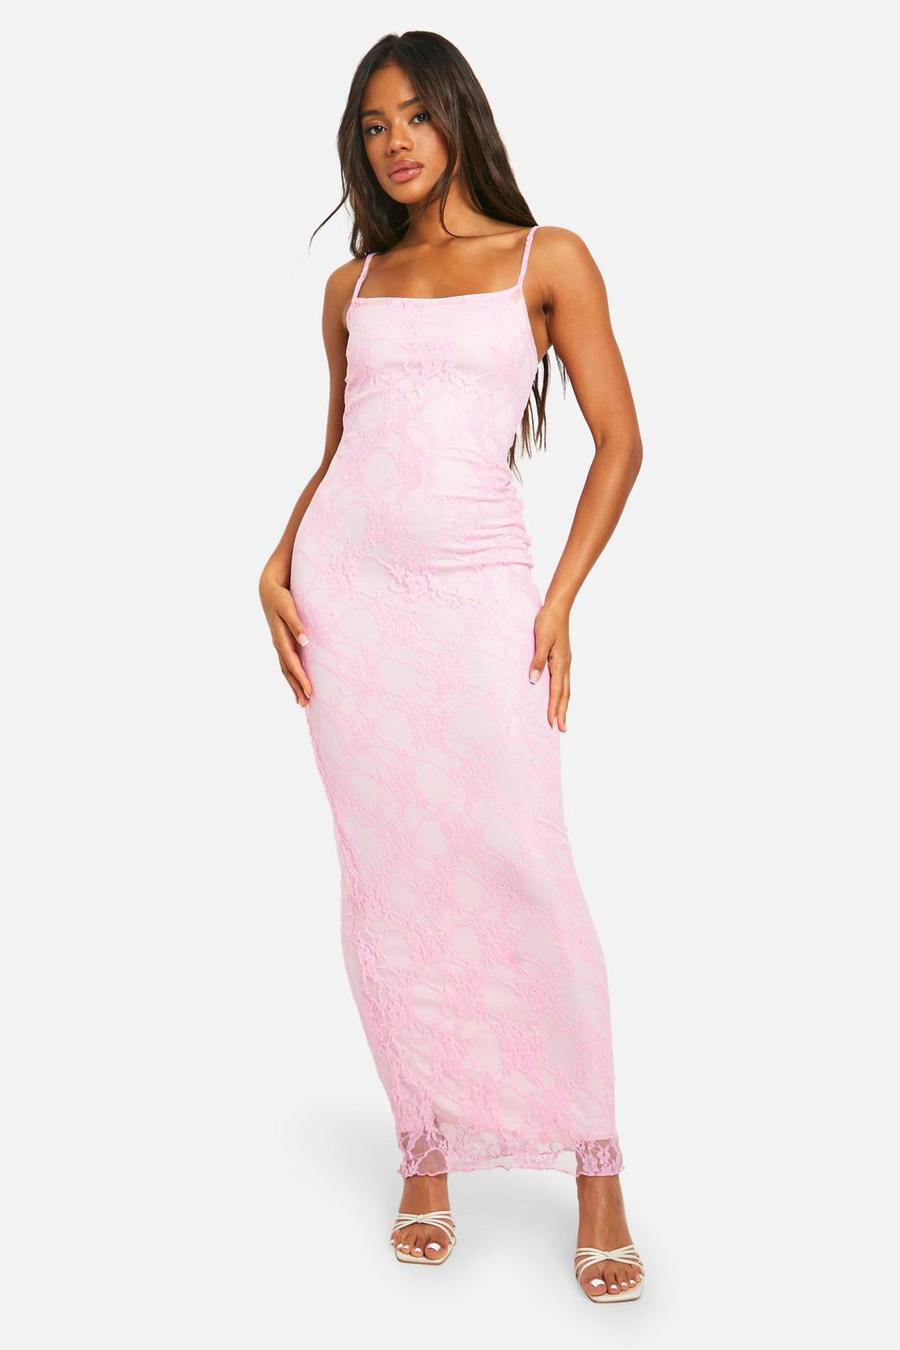 Baby pink Square Neck Strappy Lace Maxi Dress